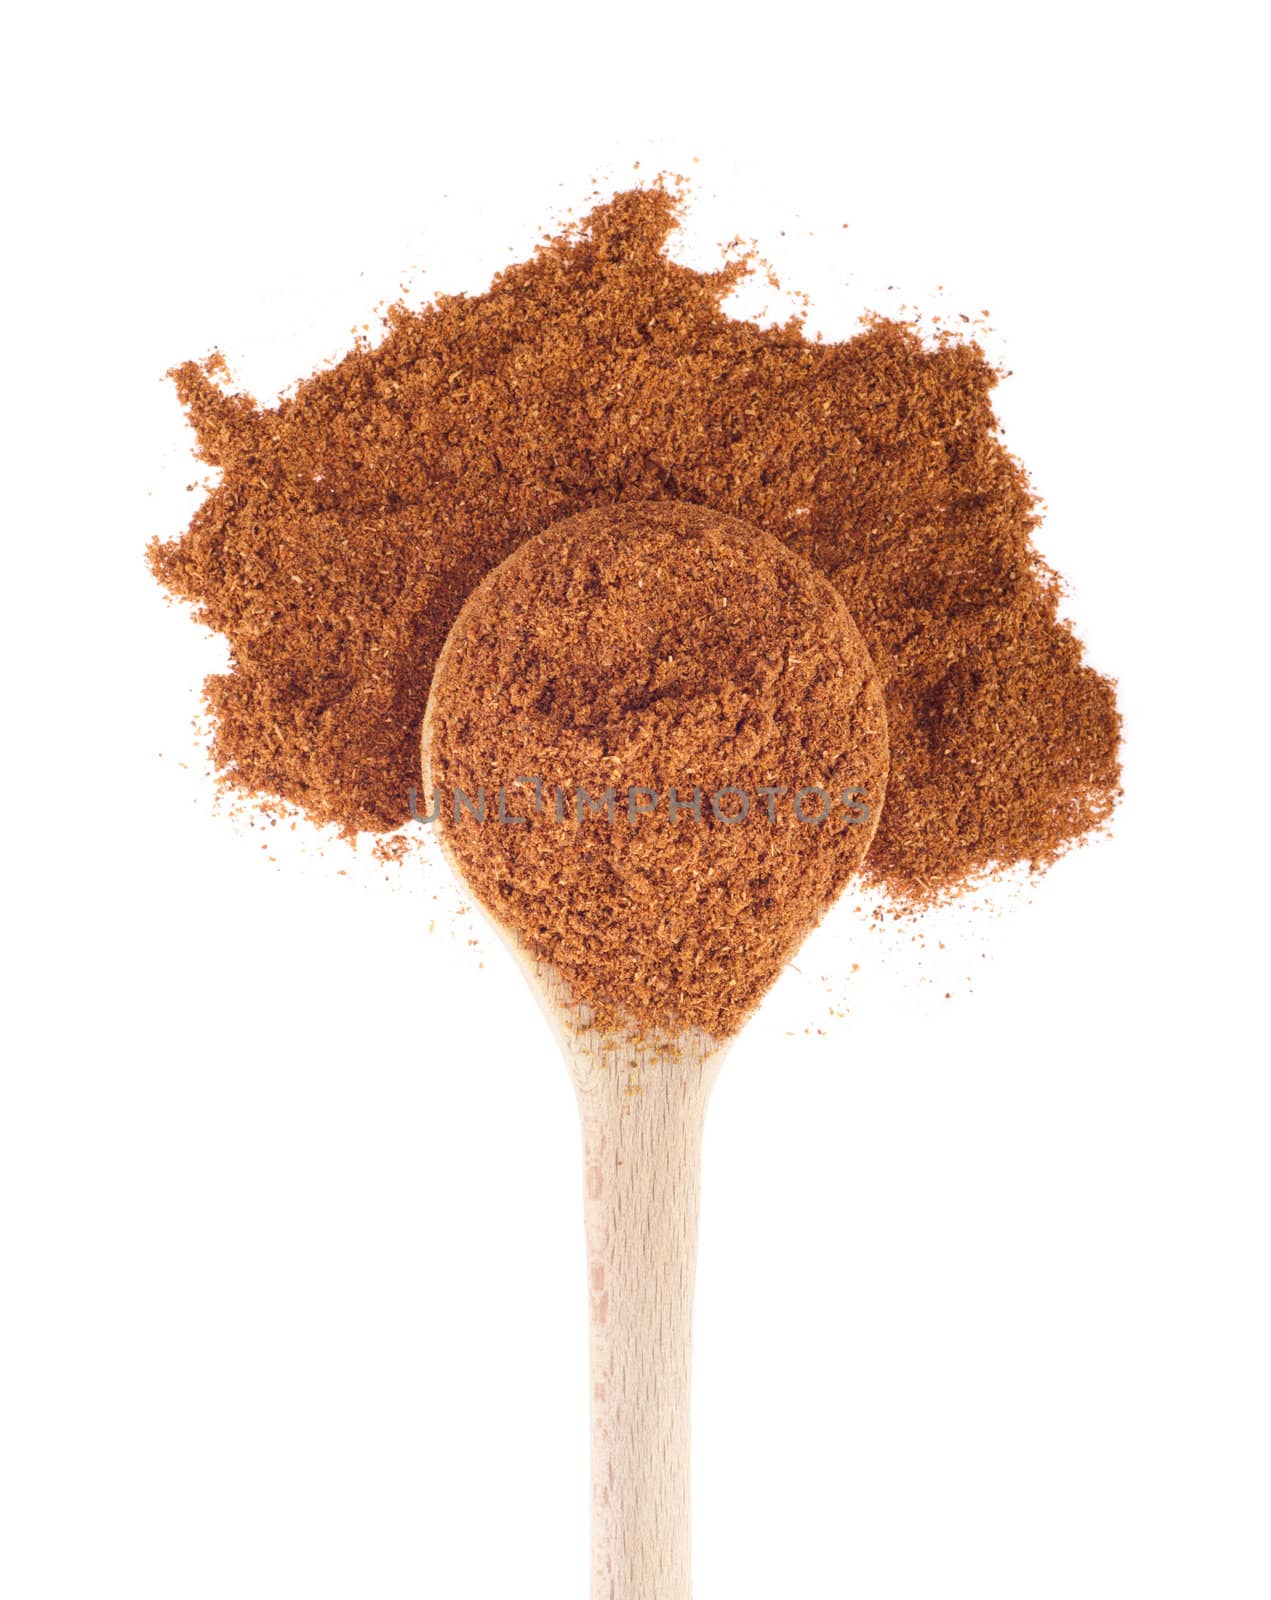 garam masala spice on a wooden spoon, isolated on white background